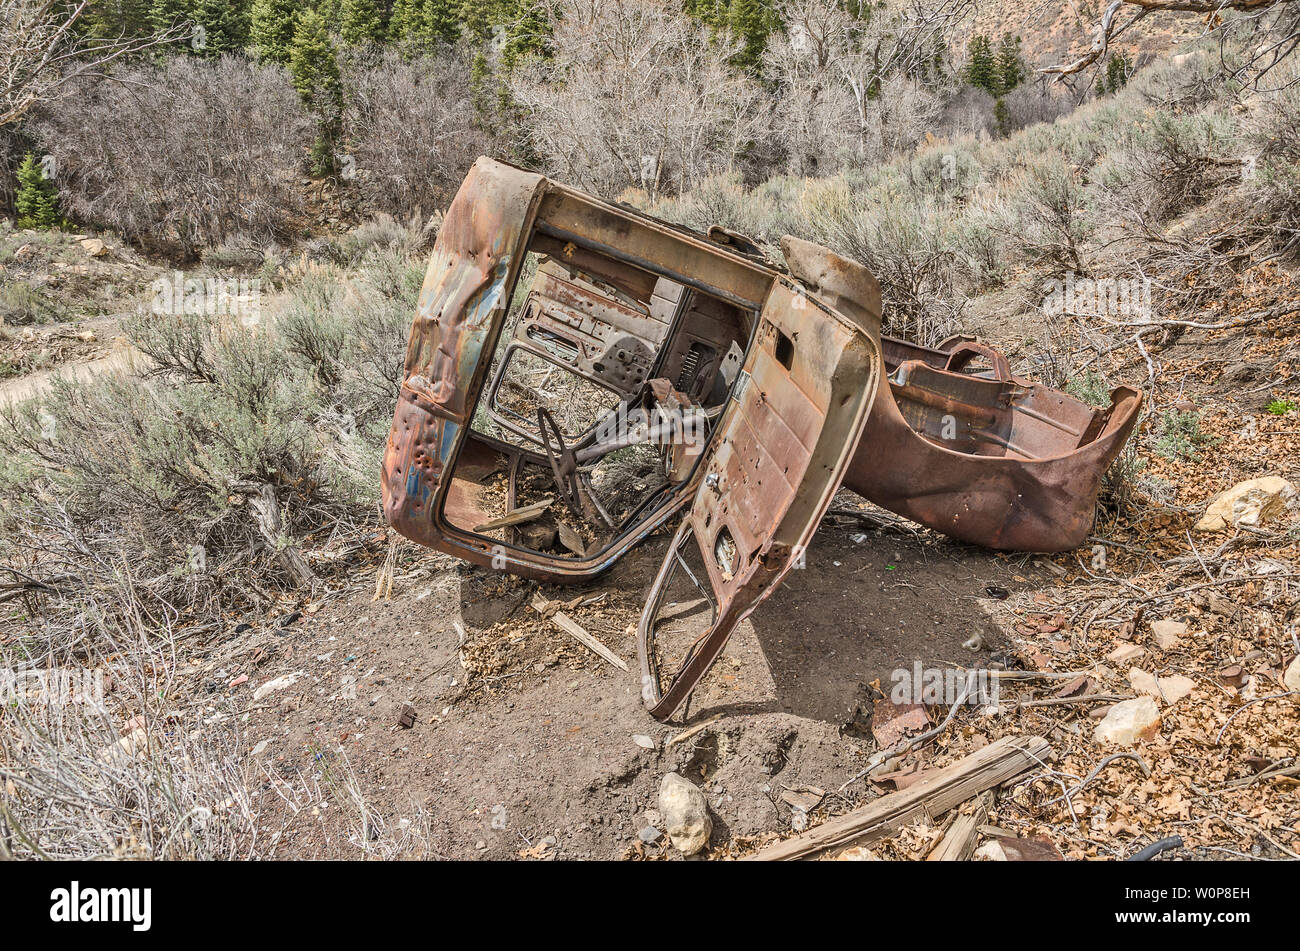 Old, rusted, dilapidated vehicle resting upside down in a rural area still has some glass in the window on the far side.  Pretty amazing since it is r Stock Photo